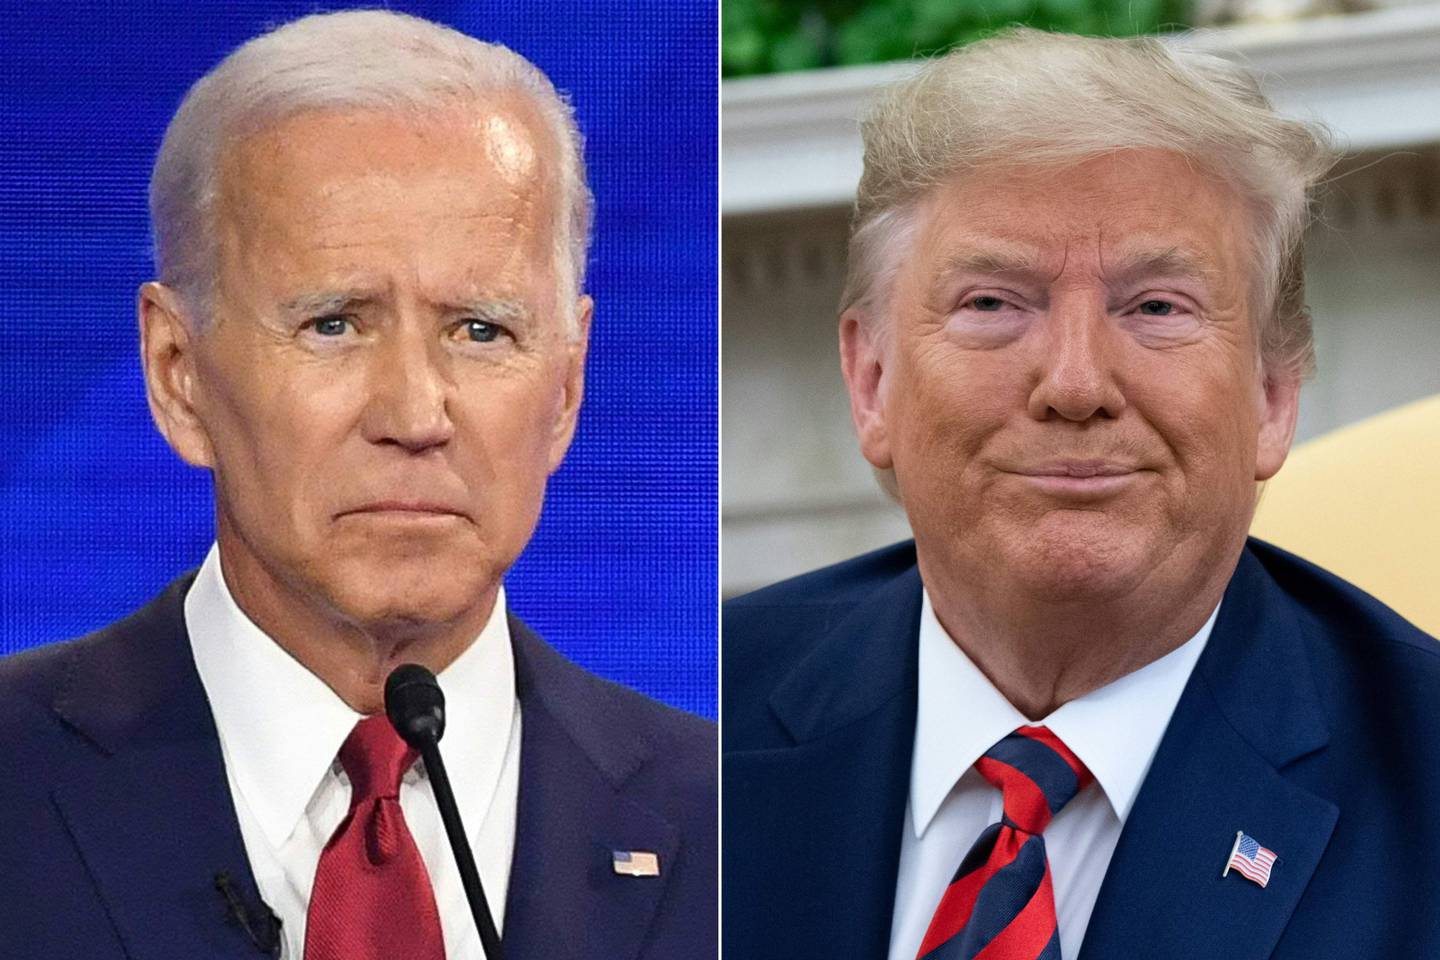 (FILES)(COMBO) This combination of files pictures created on September 24, 2019 shows Democratic presidential hopeful Former Vice President Joe Biden at Texas Southern University in Houston, Texas on September 12, 2019,and US President Donald Trump during a meeting in the Oval Office at the White House in Washington, DC, September 20, 2019. - US President Donald Trump openly called on China as well as Ukraine to investigate his potential 2020 election rival Joe Biden, taunting Democrats seeking his impeachment for inviting foreign election interference. Speaking in Florida October 3, 2019, Trump blasted his accusers as "maniacs" pursuing "impeachment crap" as he sought to turn the tables on a probe that threatens to make him only the third US president ever impeached in the House of Representatives, and face a trial in the Senate. (Photos by Robyn BECK and SAUL LOEB / AFP)